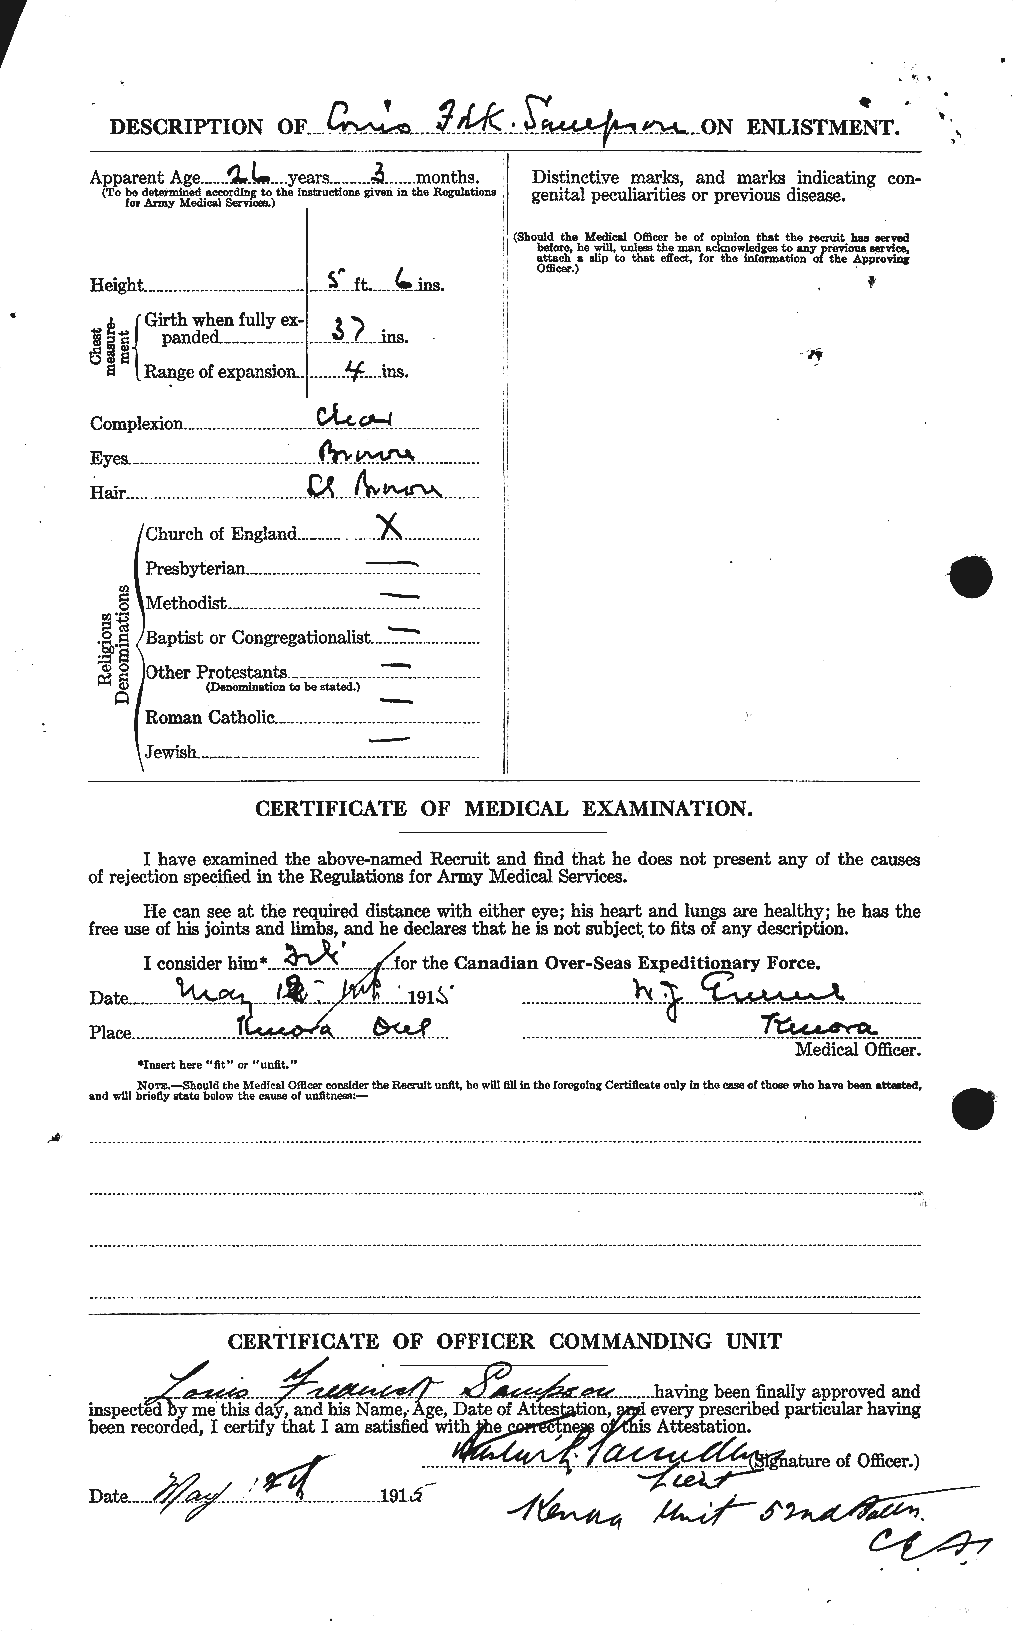 Personnel Records of the First World War - CEF 619581b